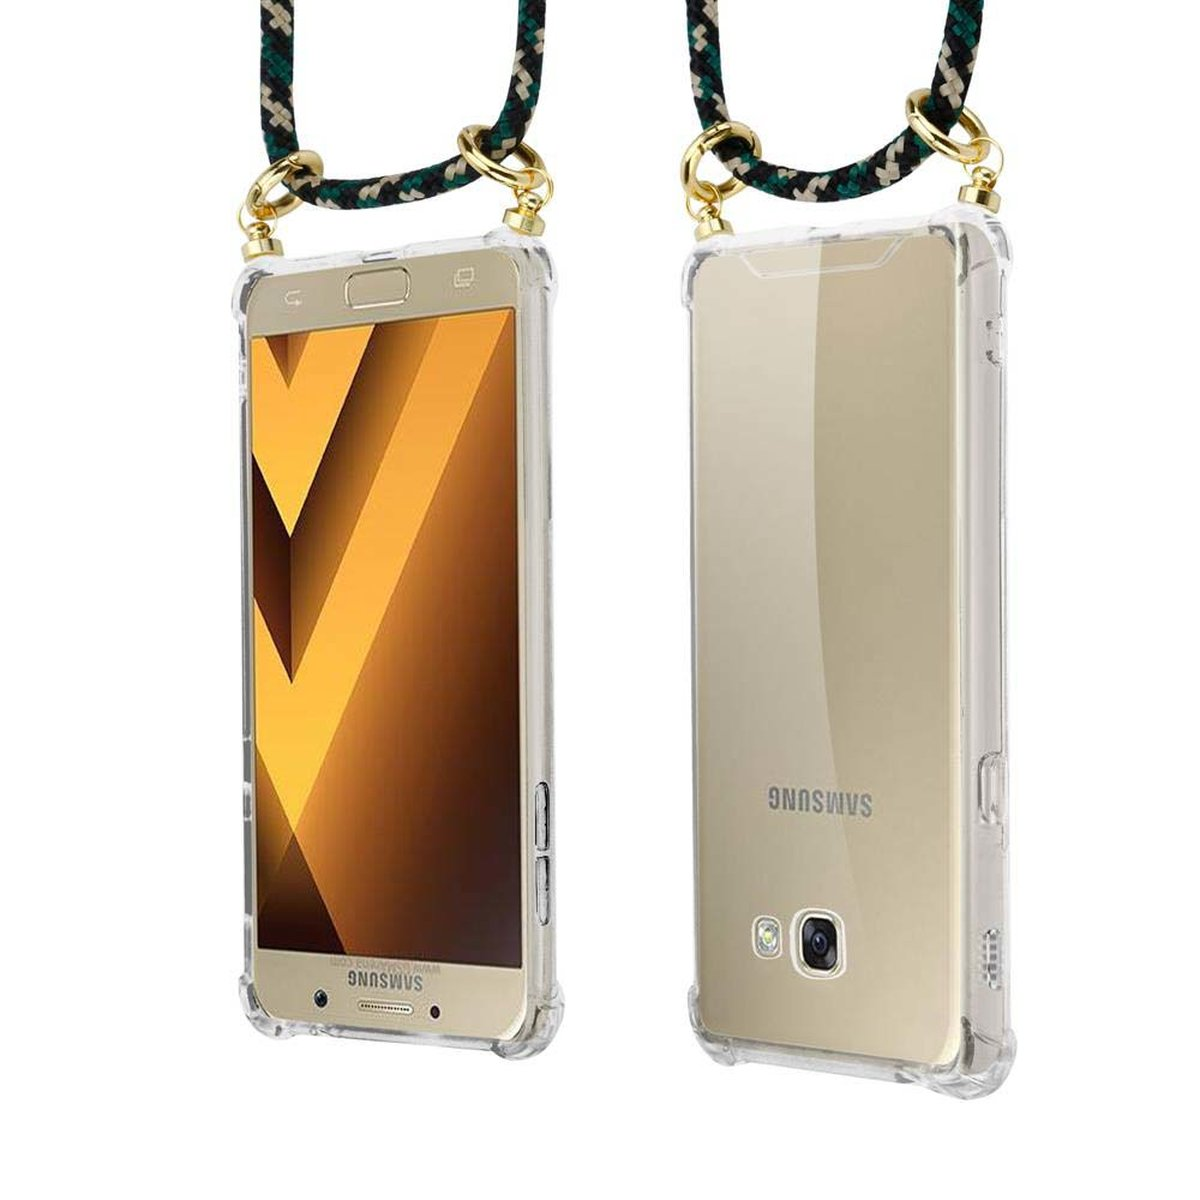 Hülle, CAMOUFLAGE abnehmbarer Band und Kordel Samsung, 2017, A5 Handy mit Backcover, Gold Ringen, Galaxy CADORABO Kette